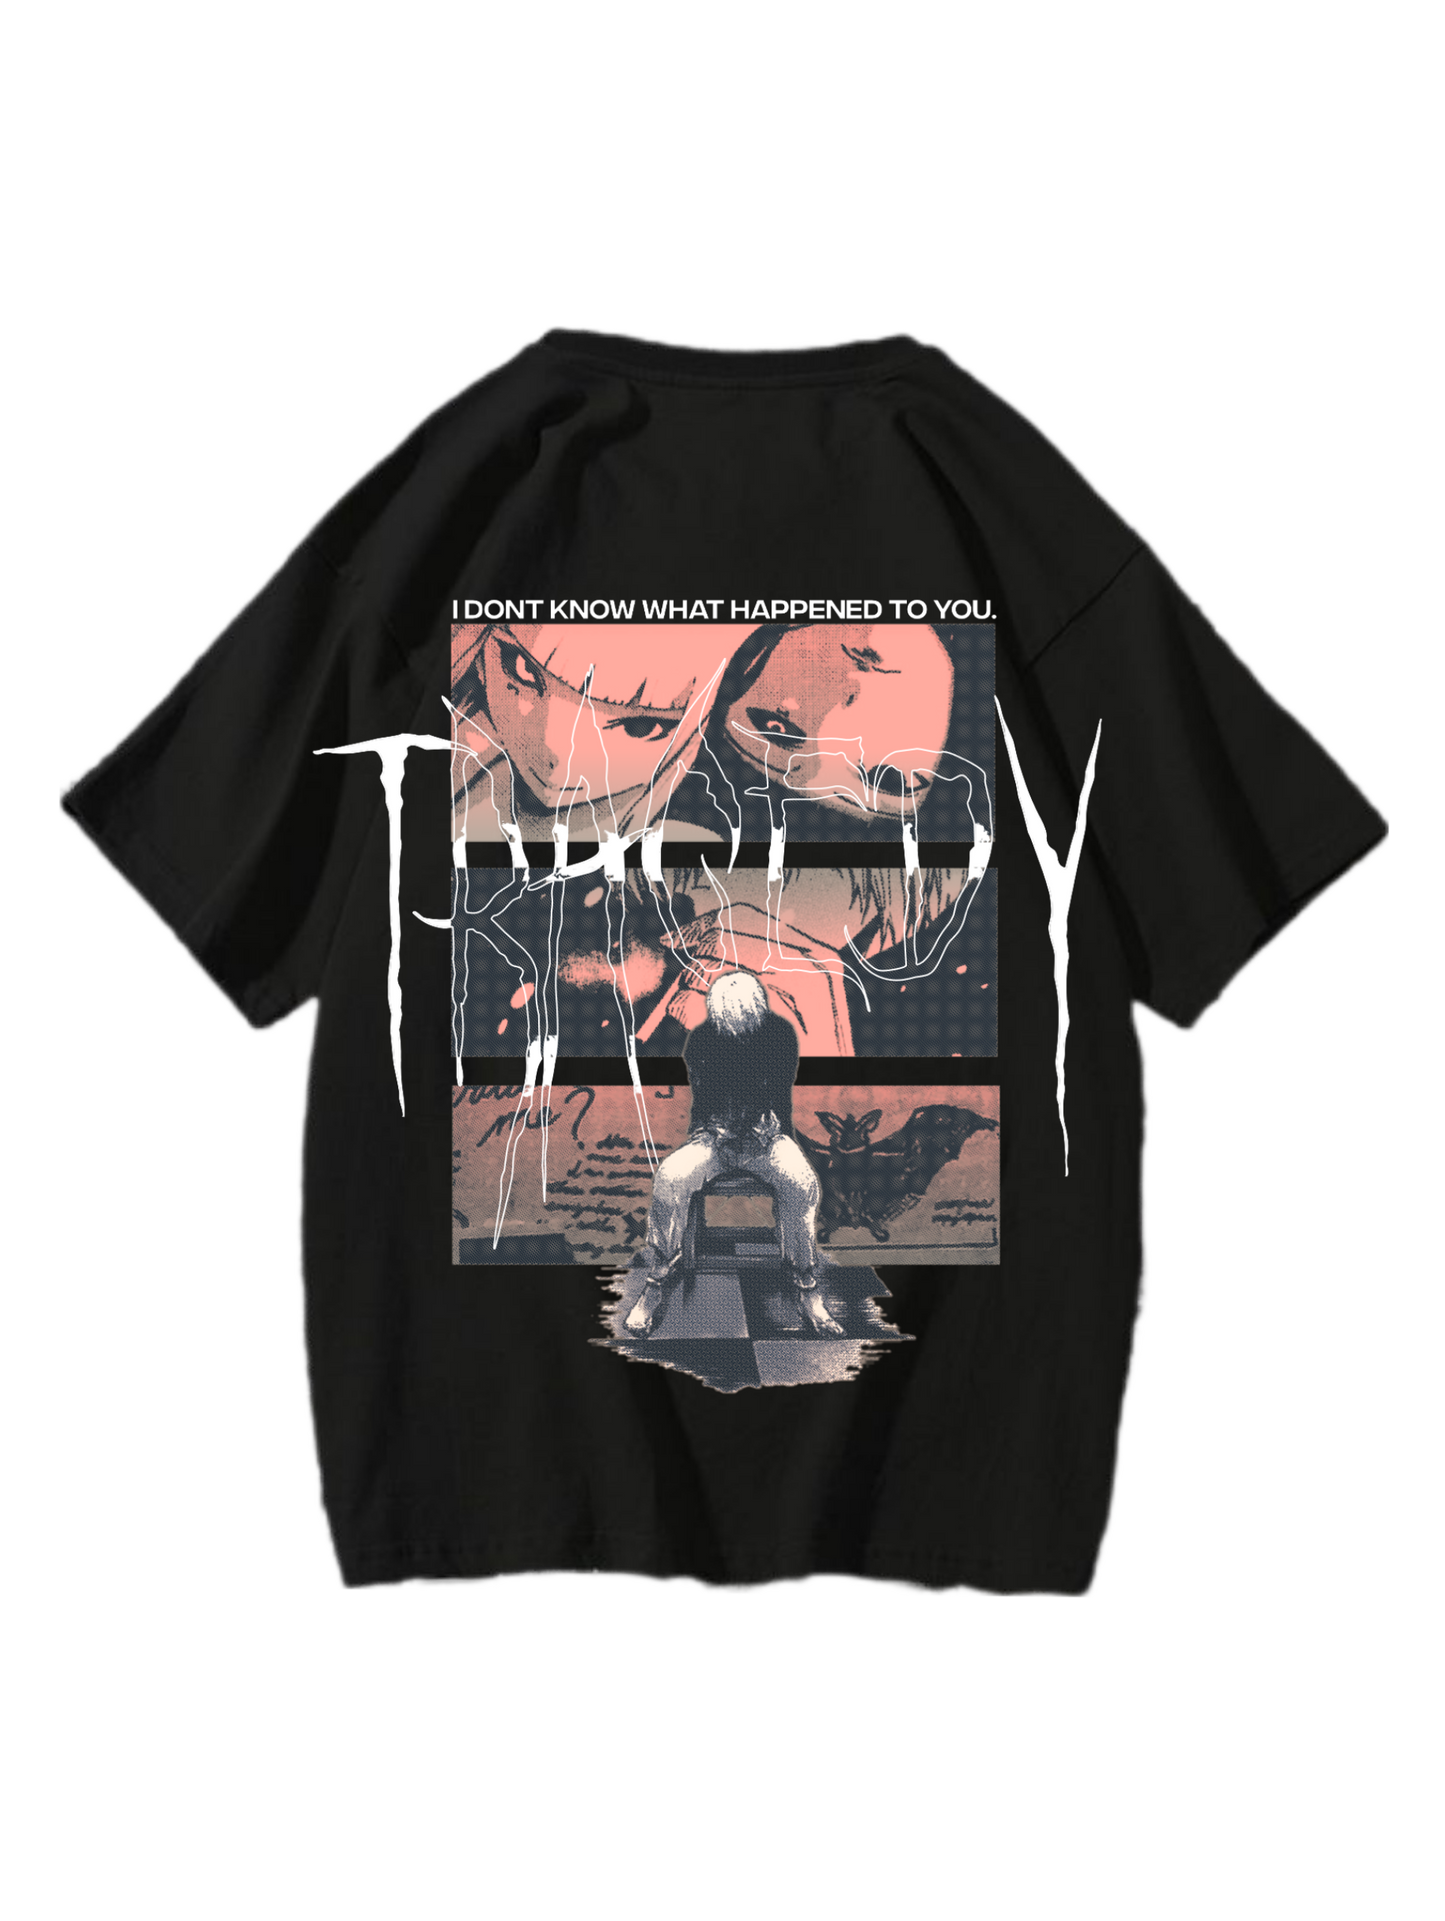 ‘Tragedy’ graphic tee